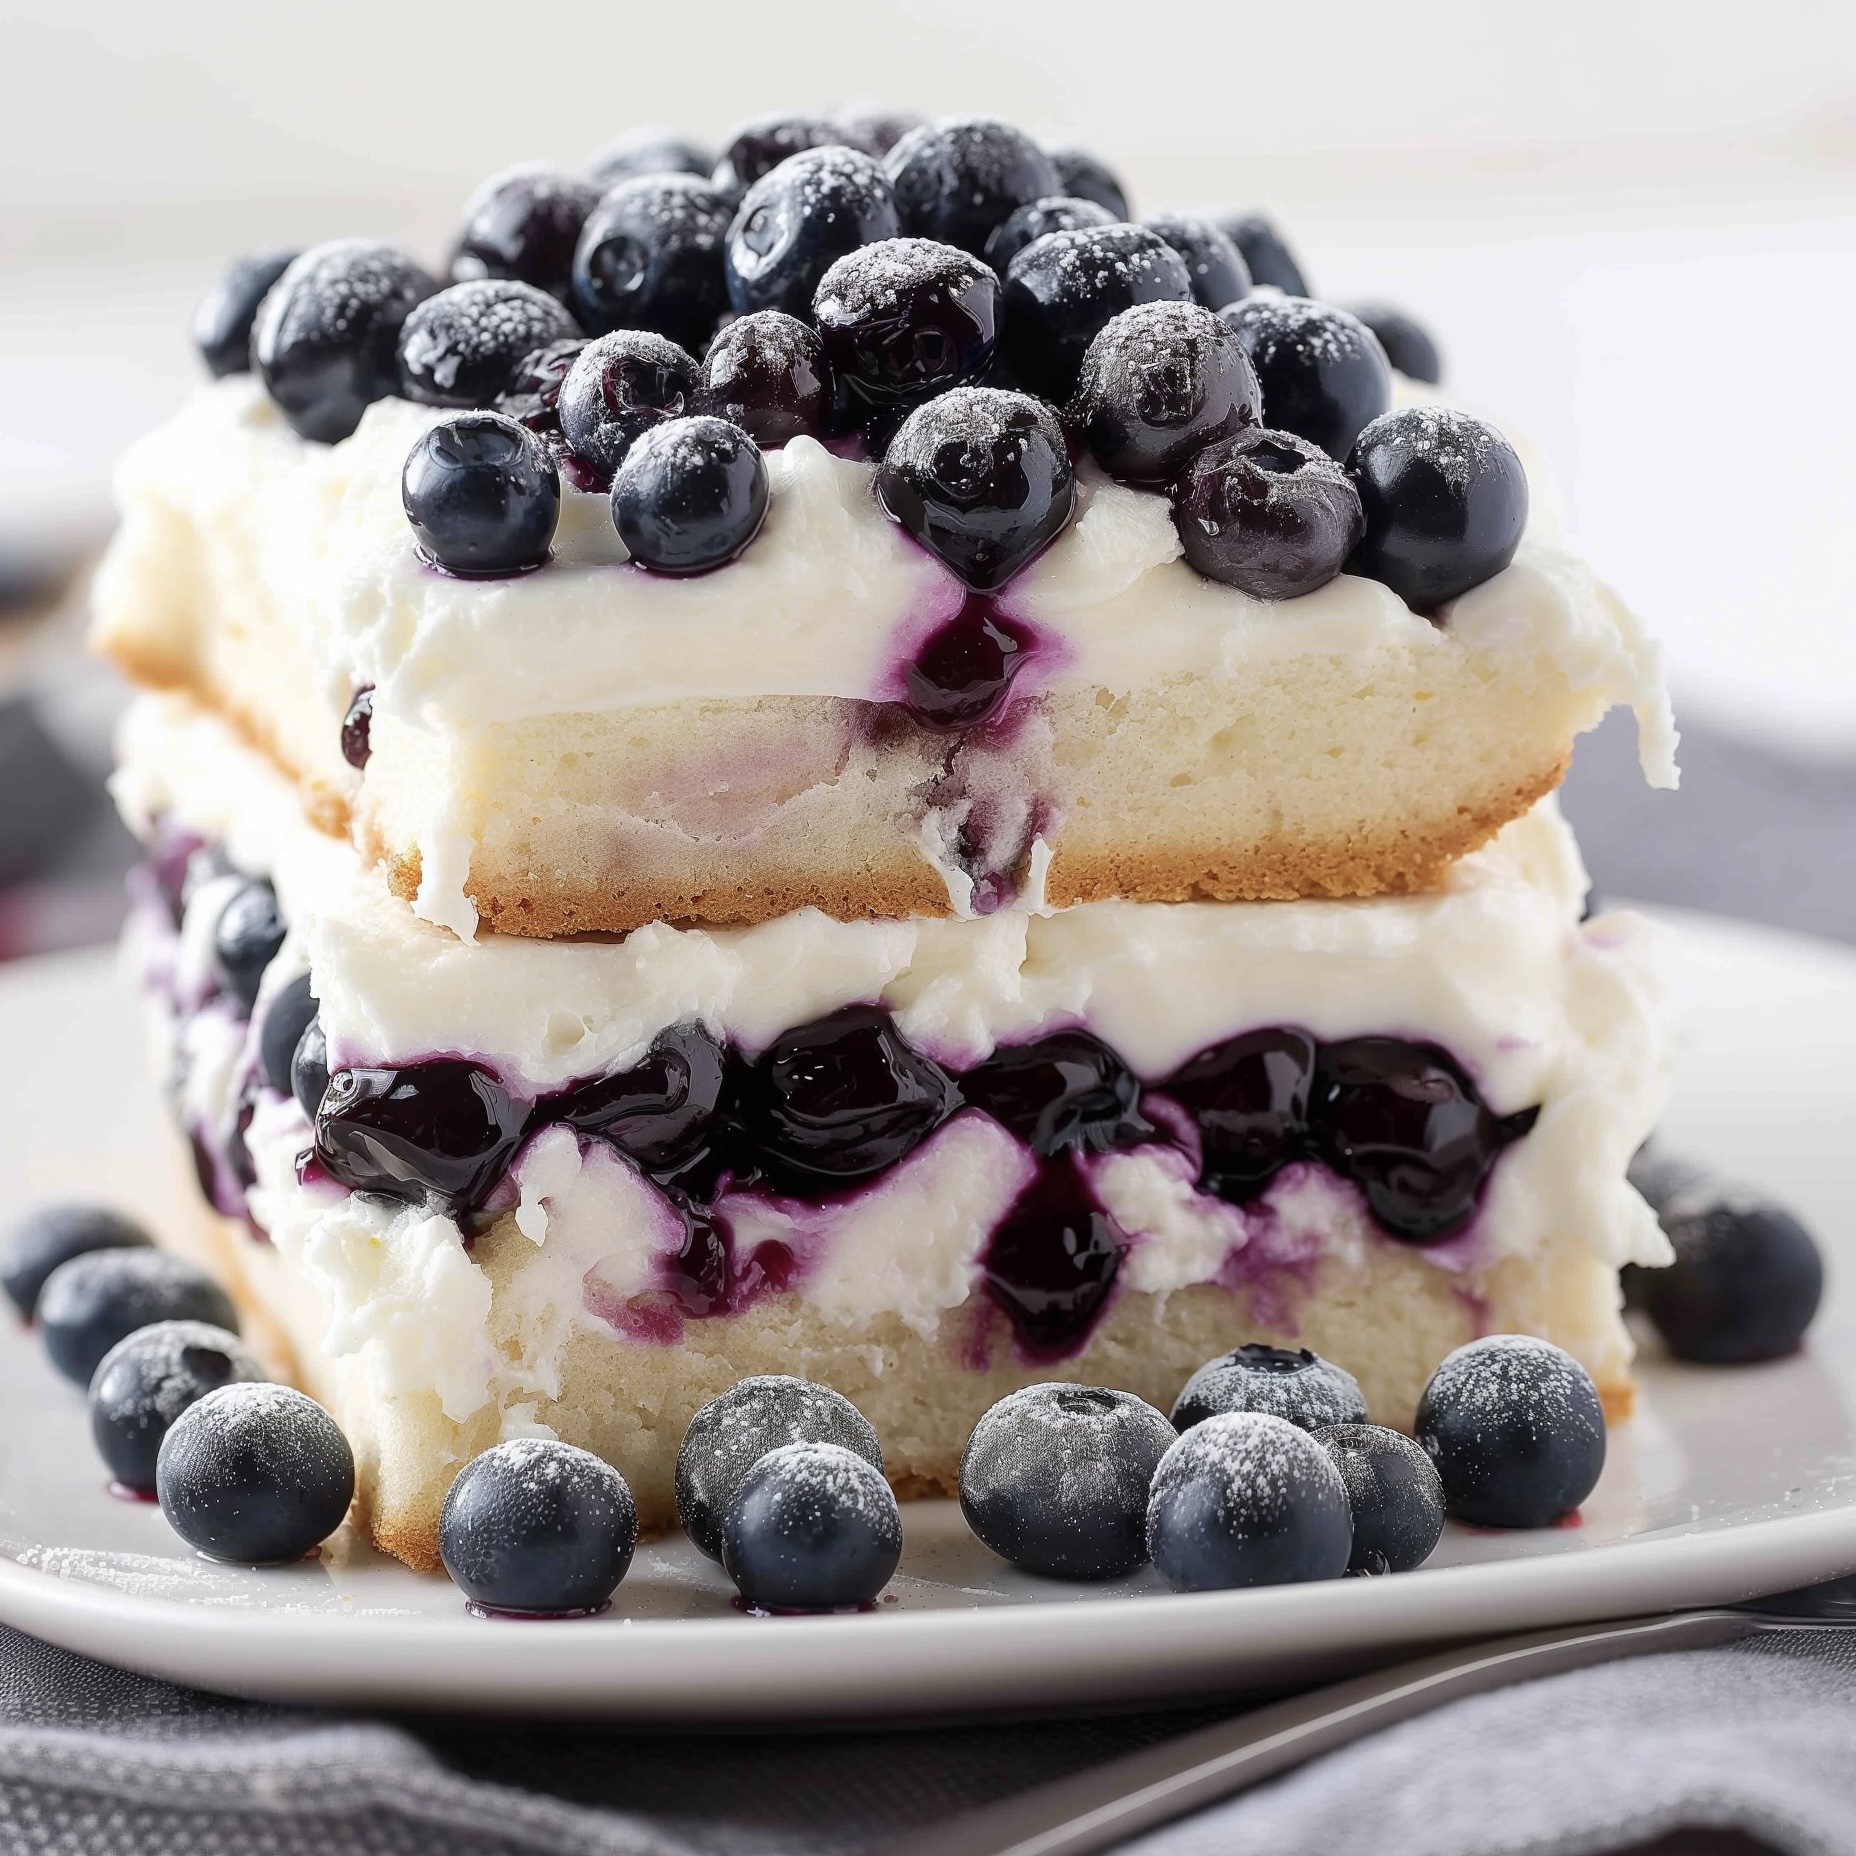 Layers of Blueberry Shortcake during assembly.